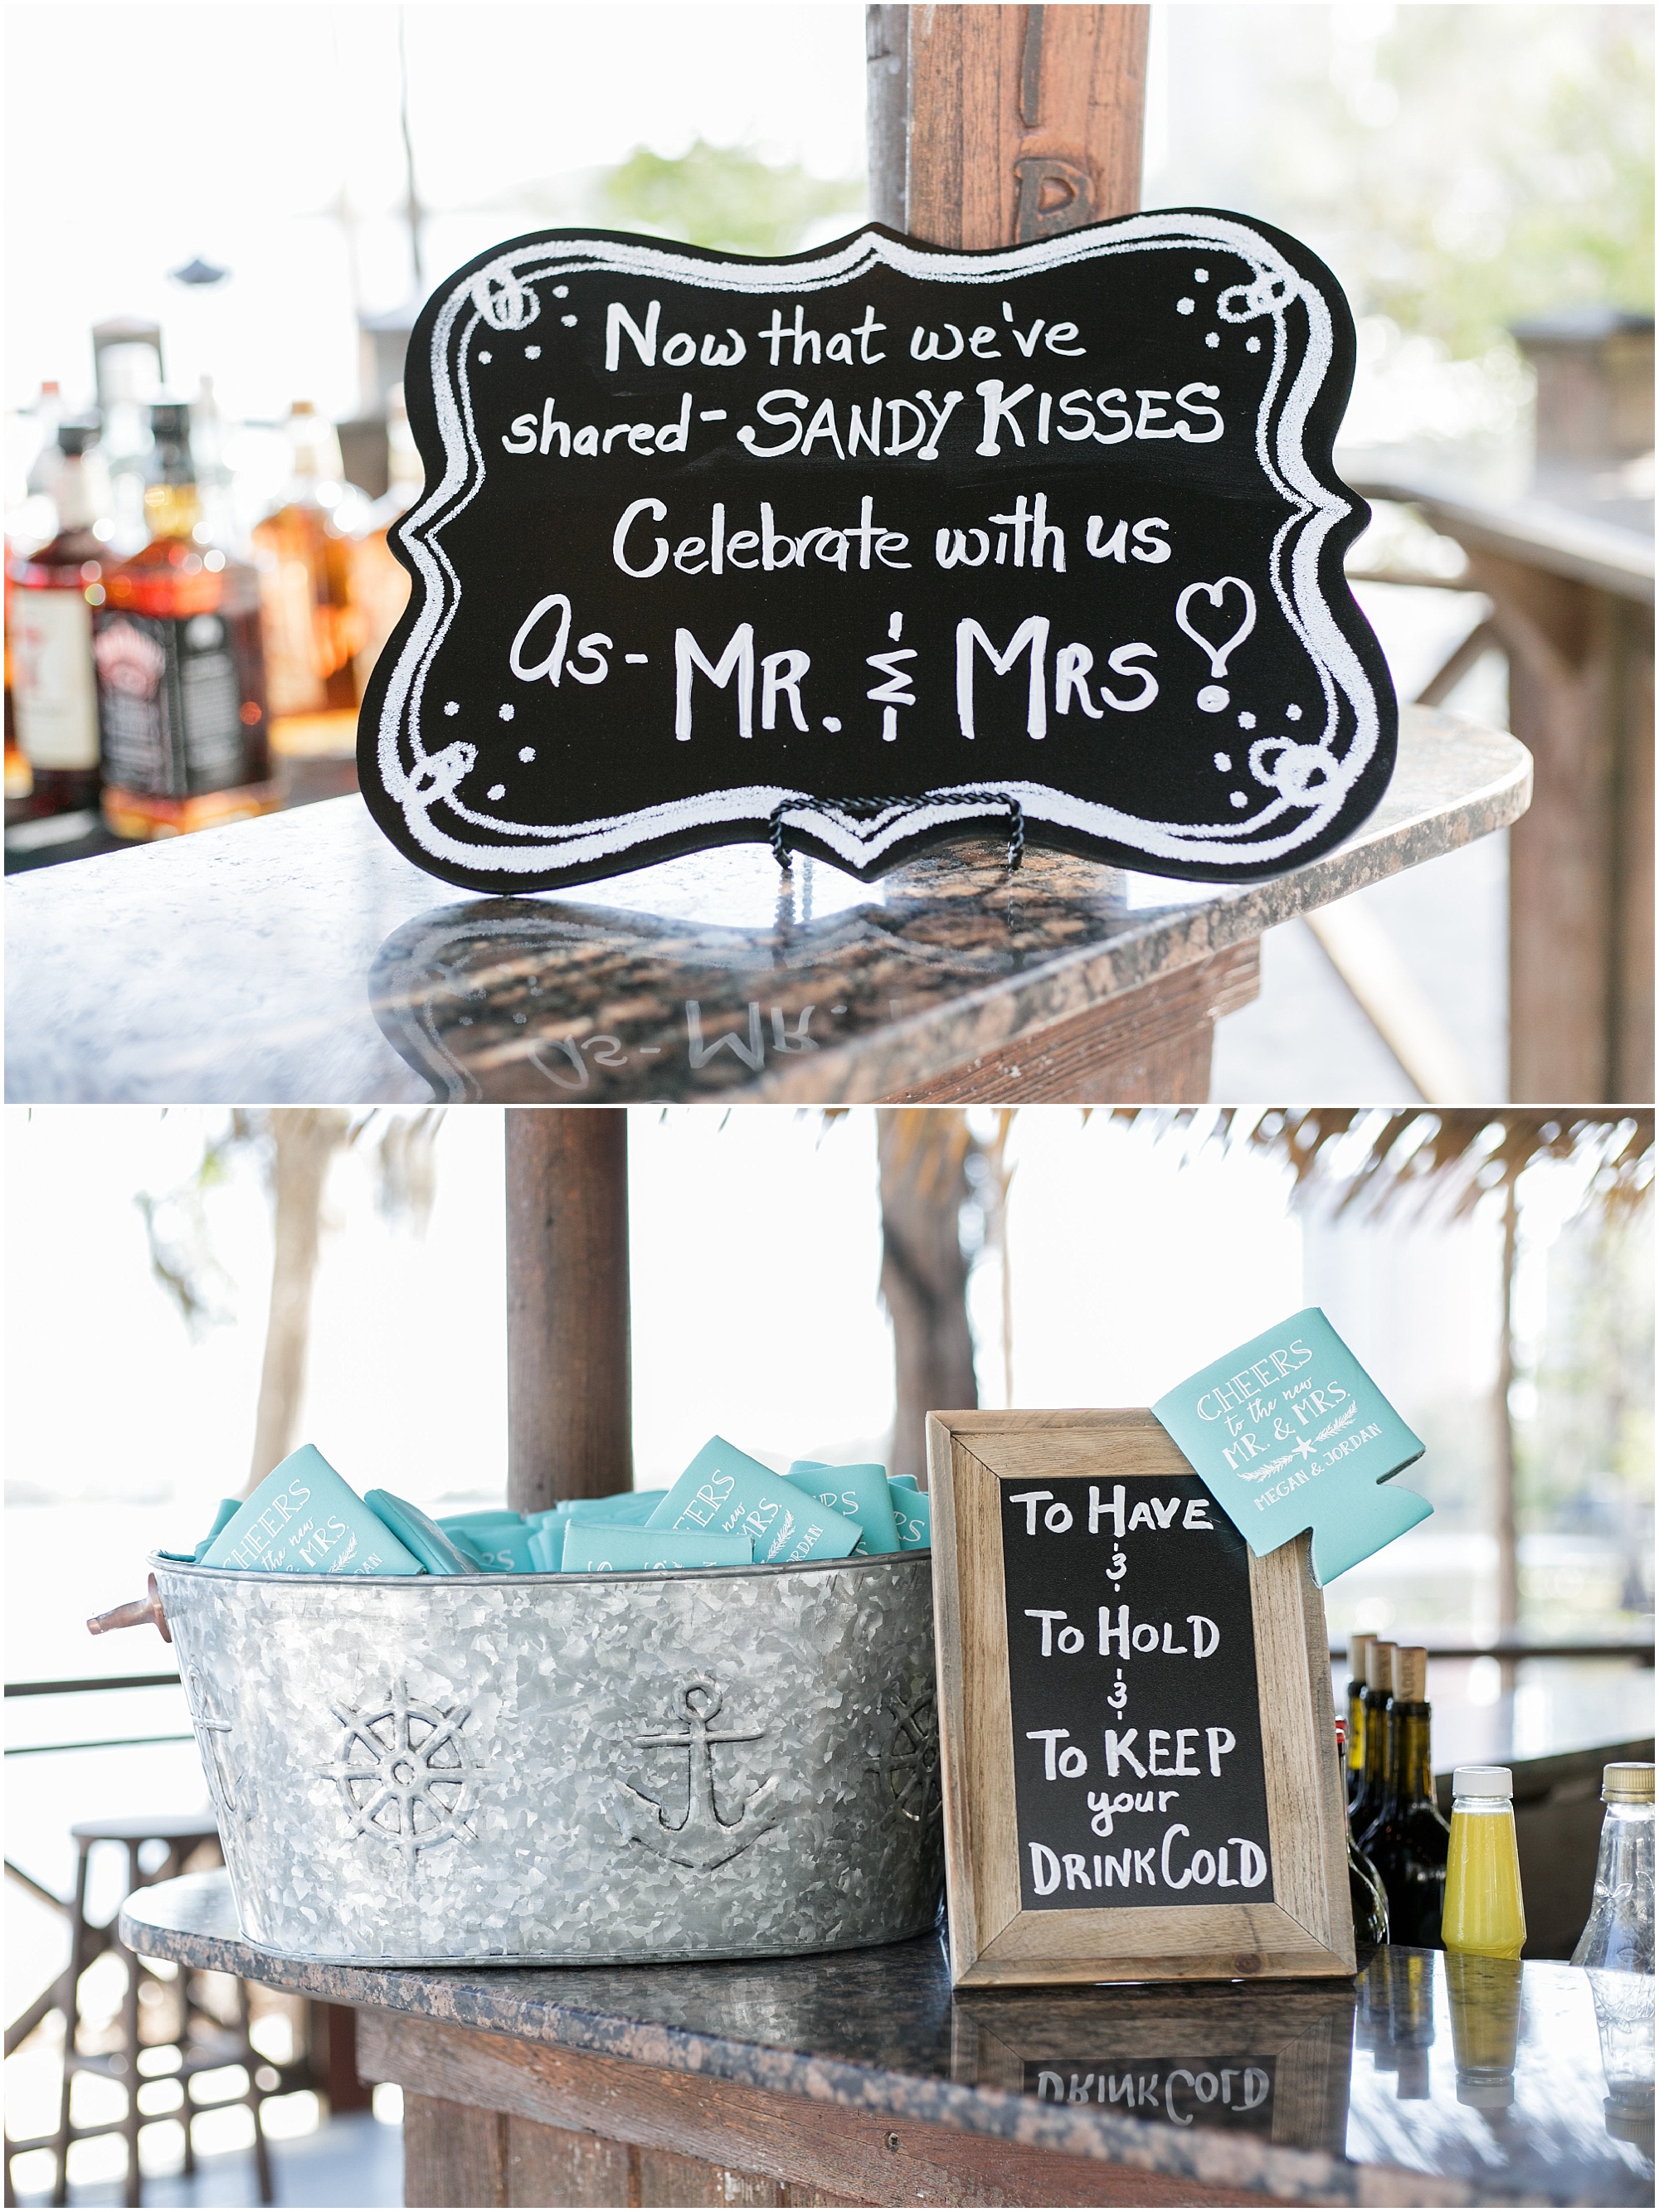 Hand written signs for drinks. 